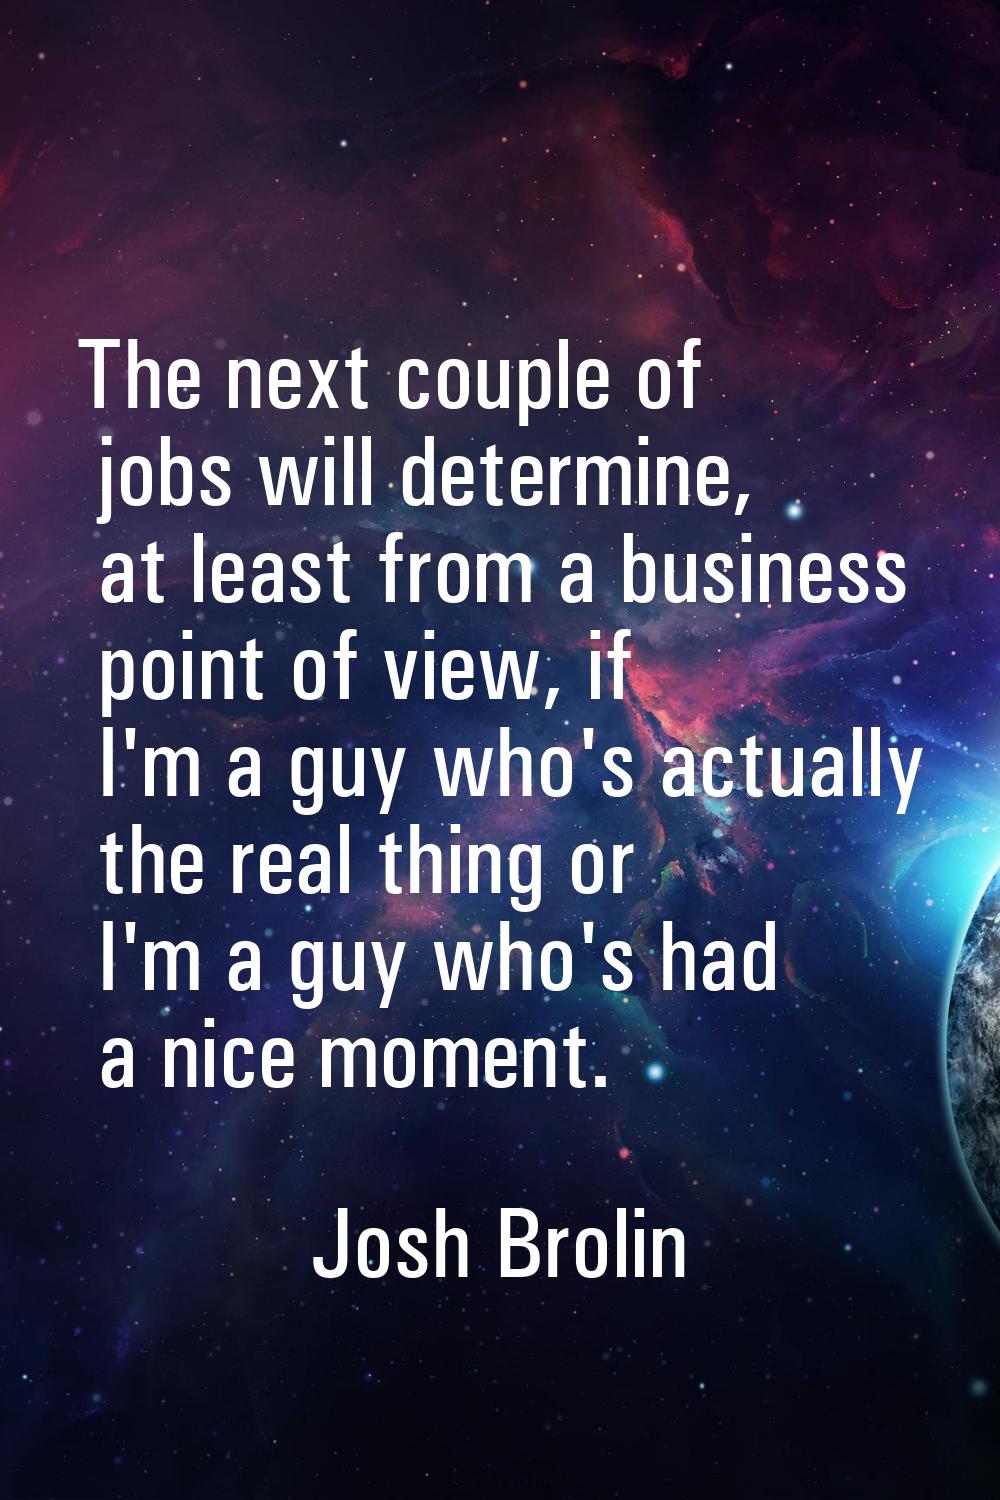 The next couple of jobs will determine, at least from a business point of view, if I'm a guy who's 